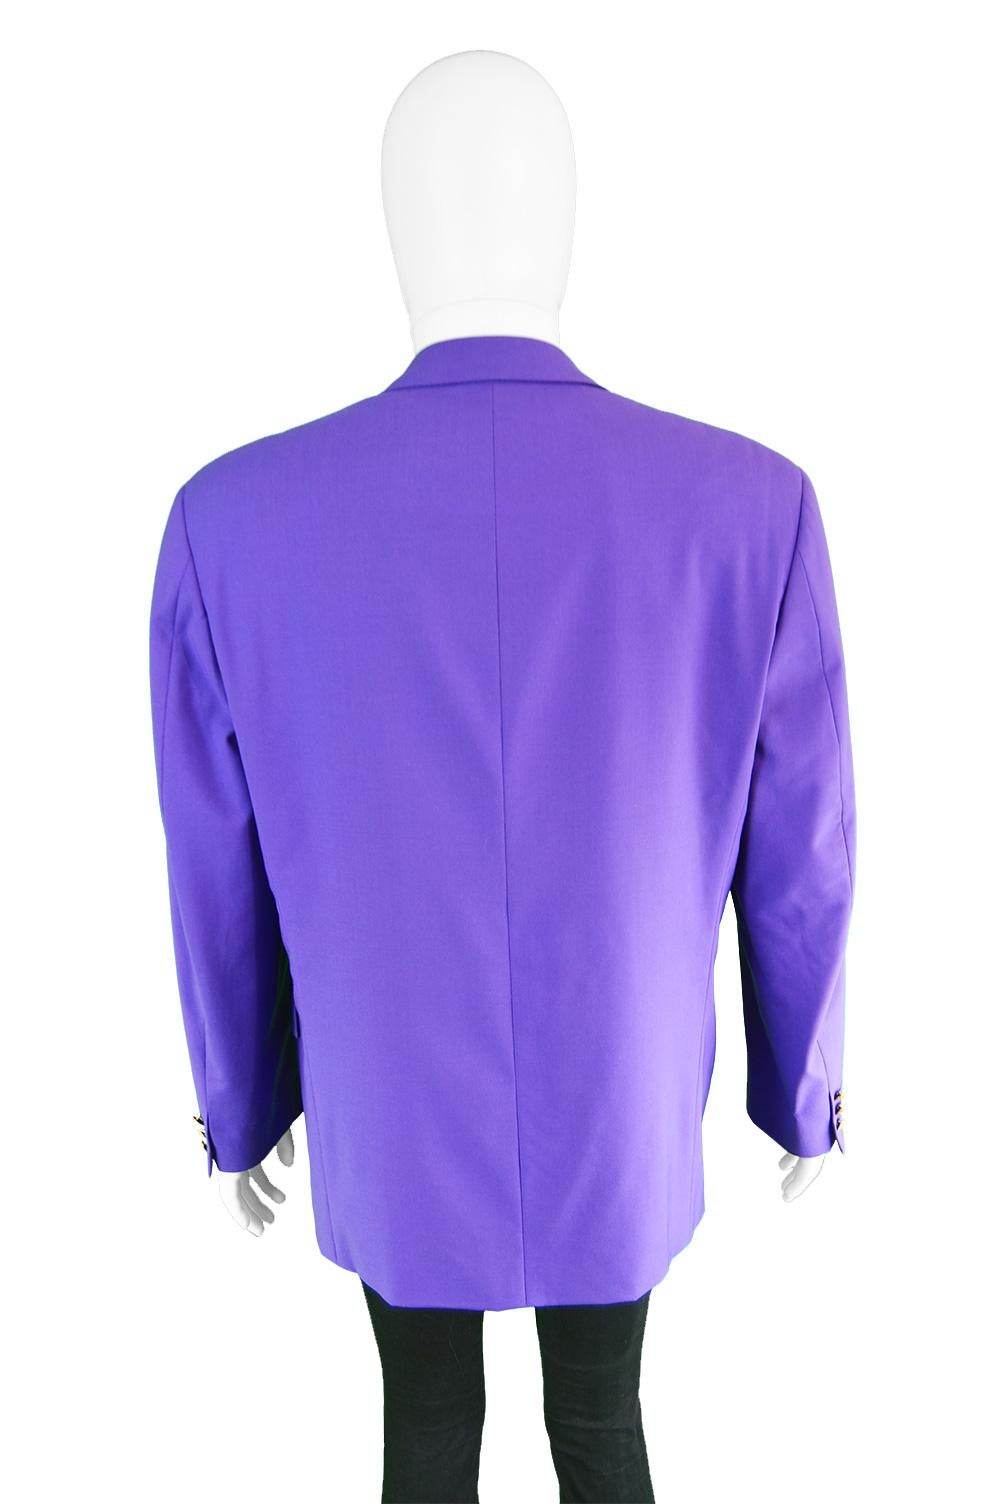 Kenzo Vintage Men's Bright Purple Pure Worsted Wool Blazer Jacket, 1980s For Sale 3